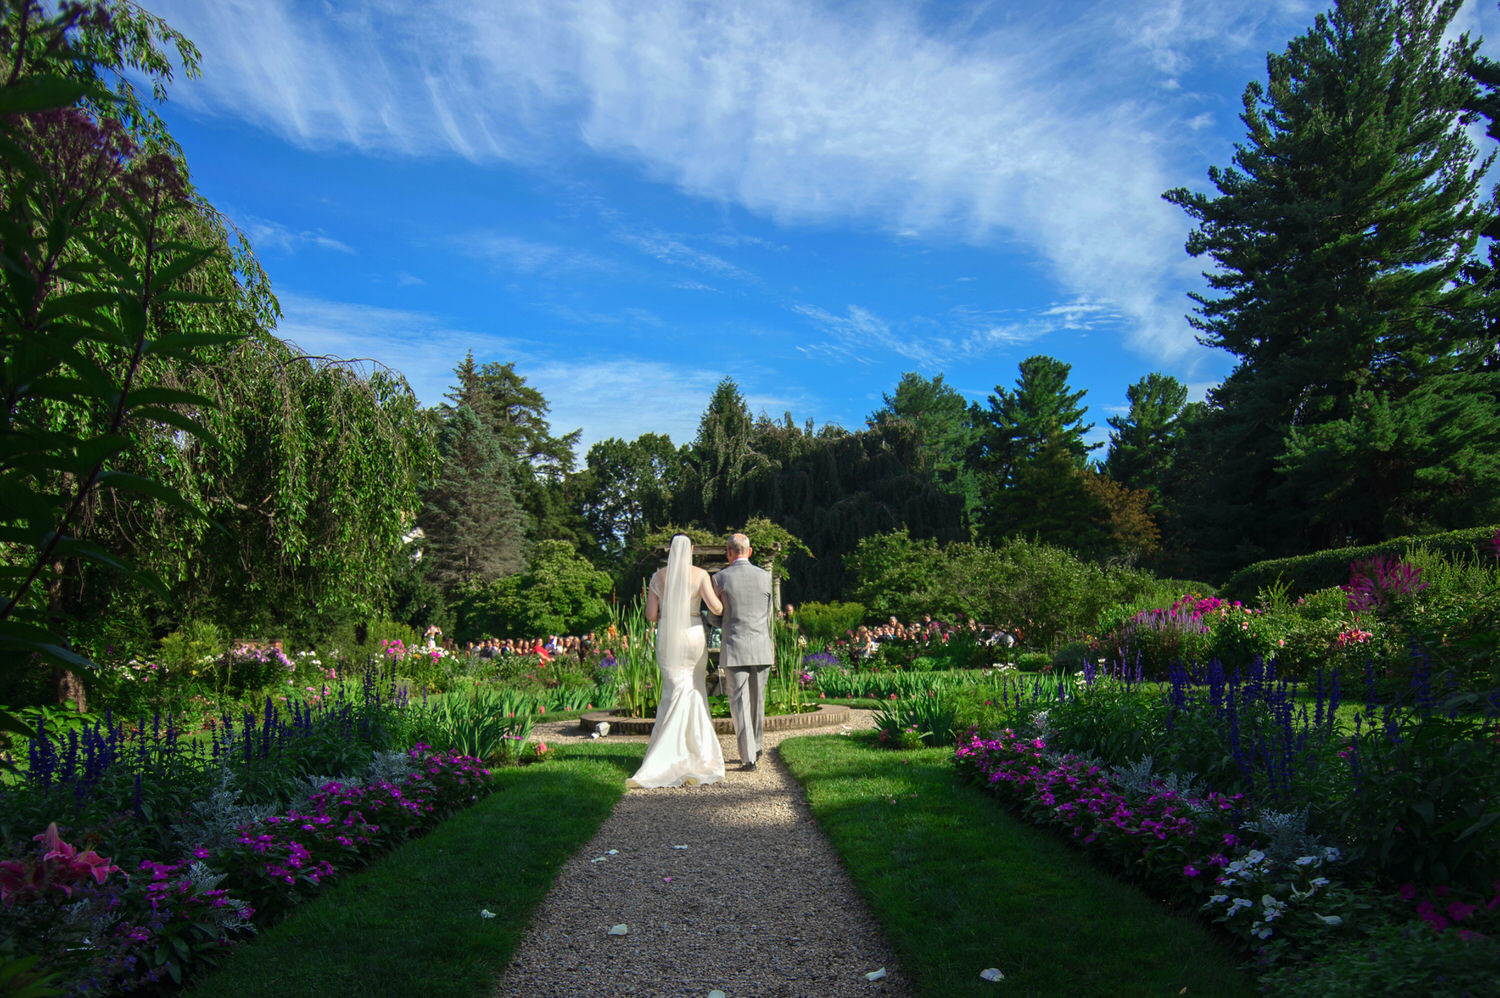 A bride and groom walking hand in hand along a garden path with vibrant flowers and clear blue skies above, depicting a serene outdoor wedding setting at one of the best wedding venues in Massachusetts